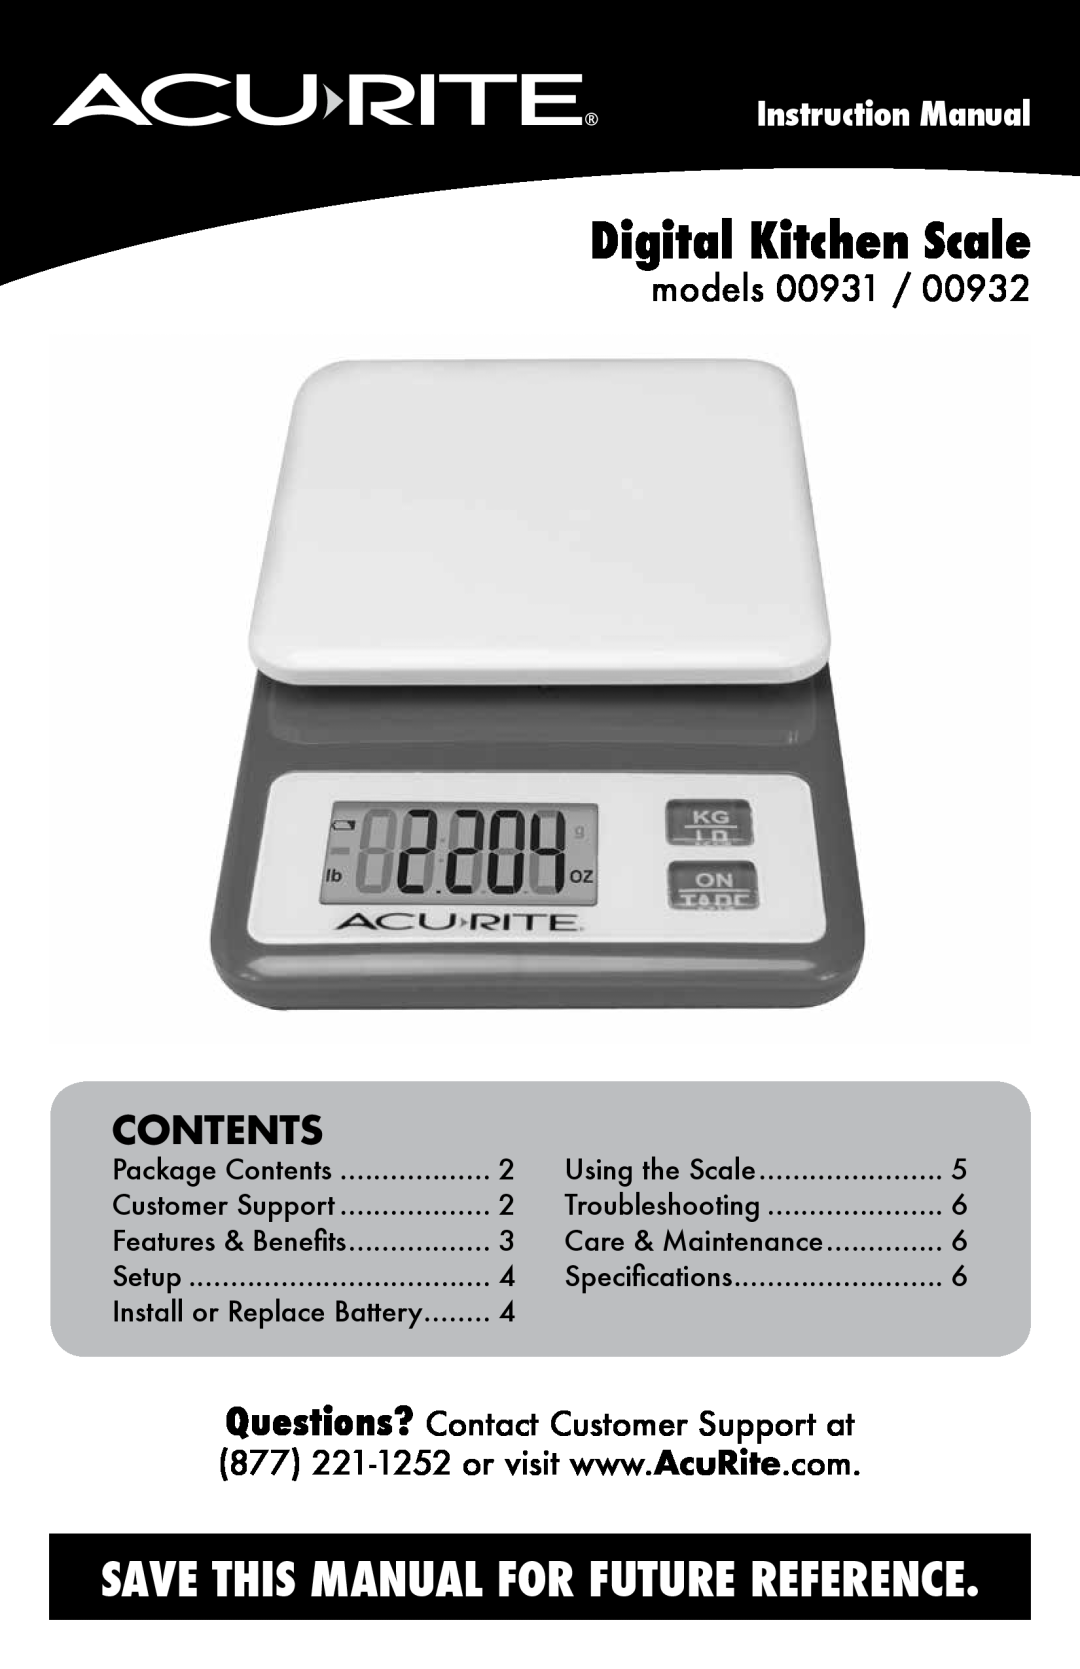 Acu-Rite 932 instruction manual Contents, models 00931, Instruction Manual, Digital Kitchen Scale 